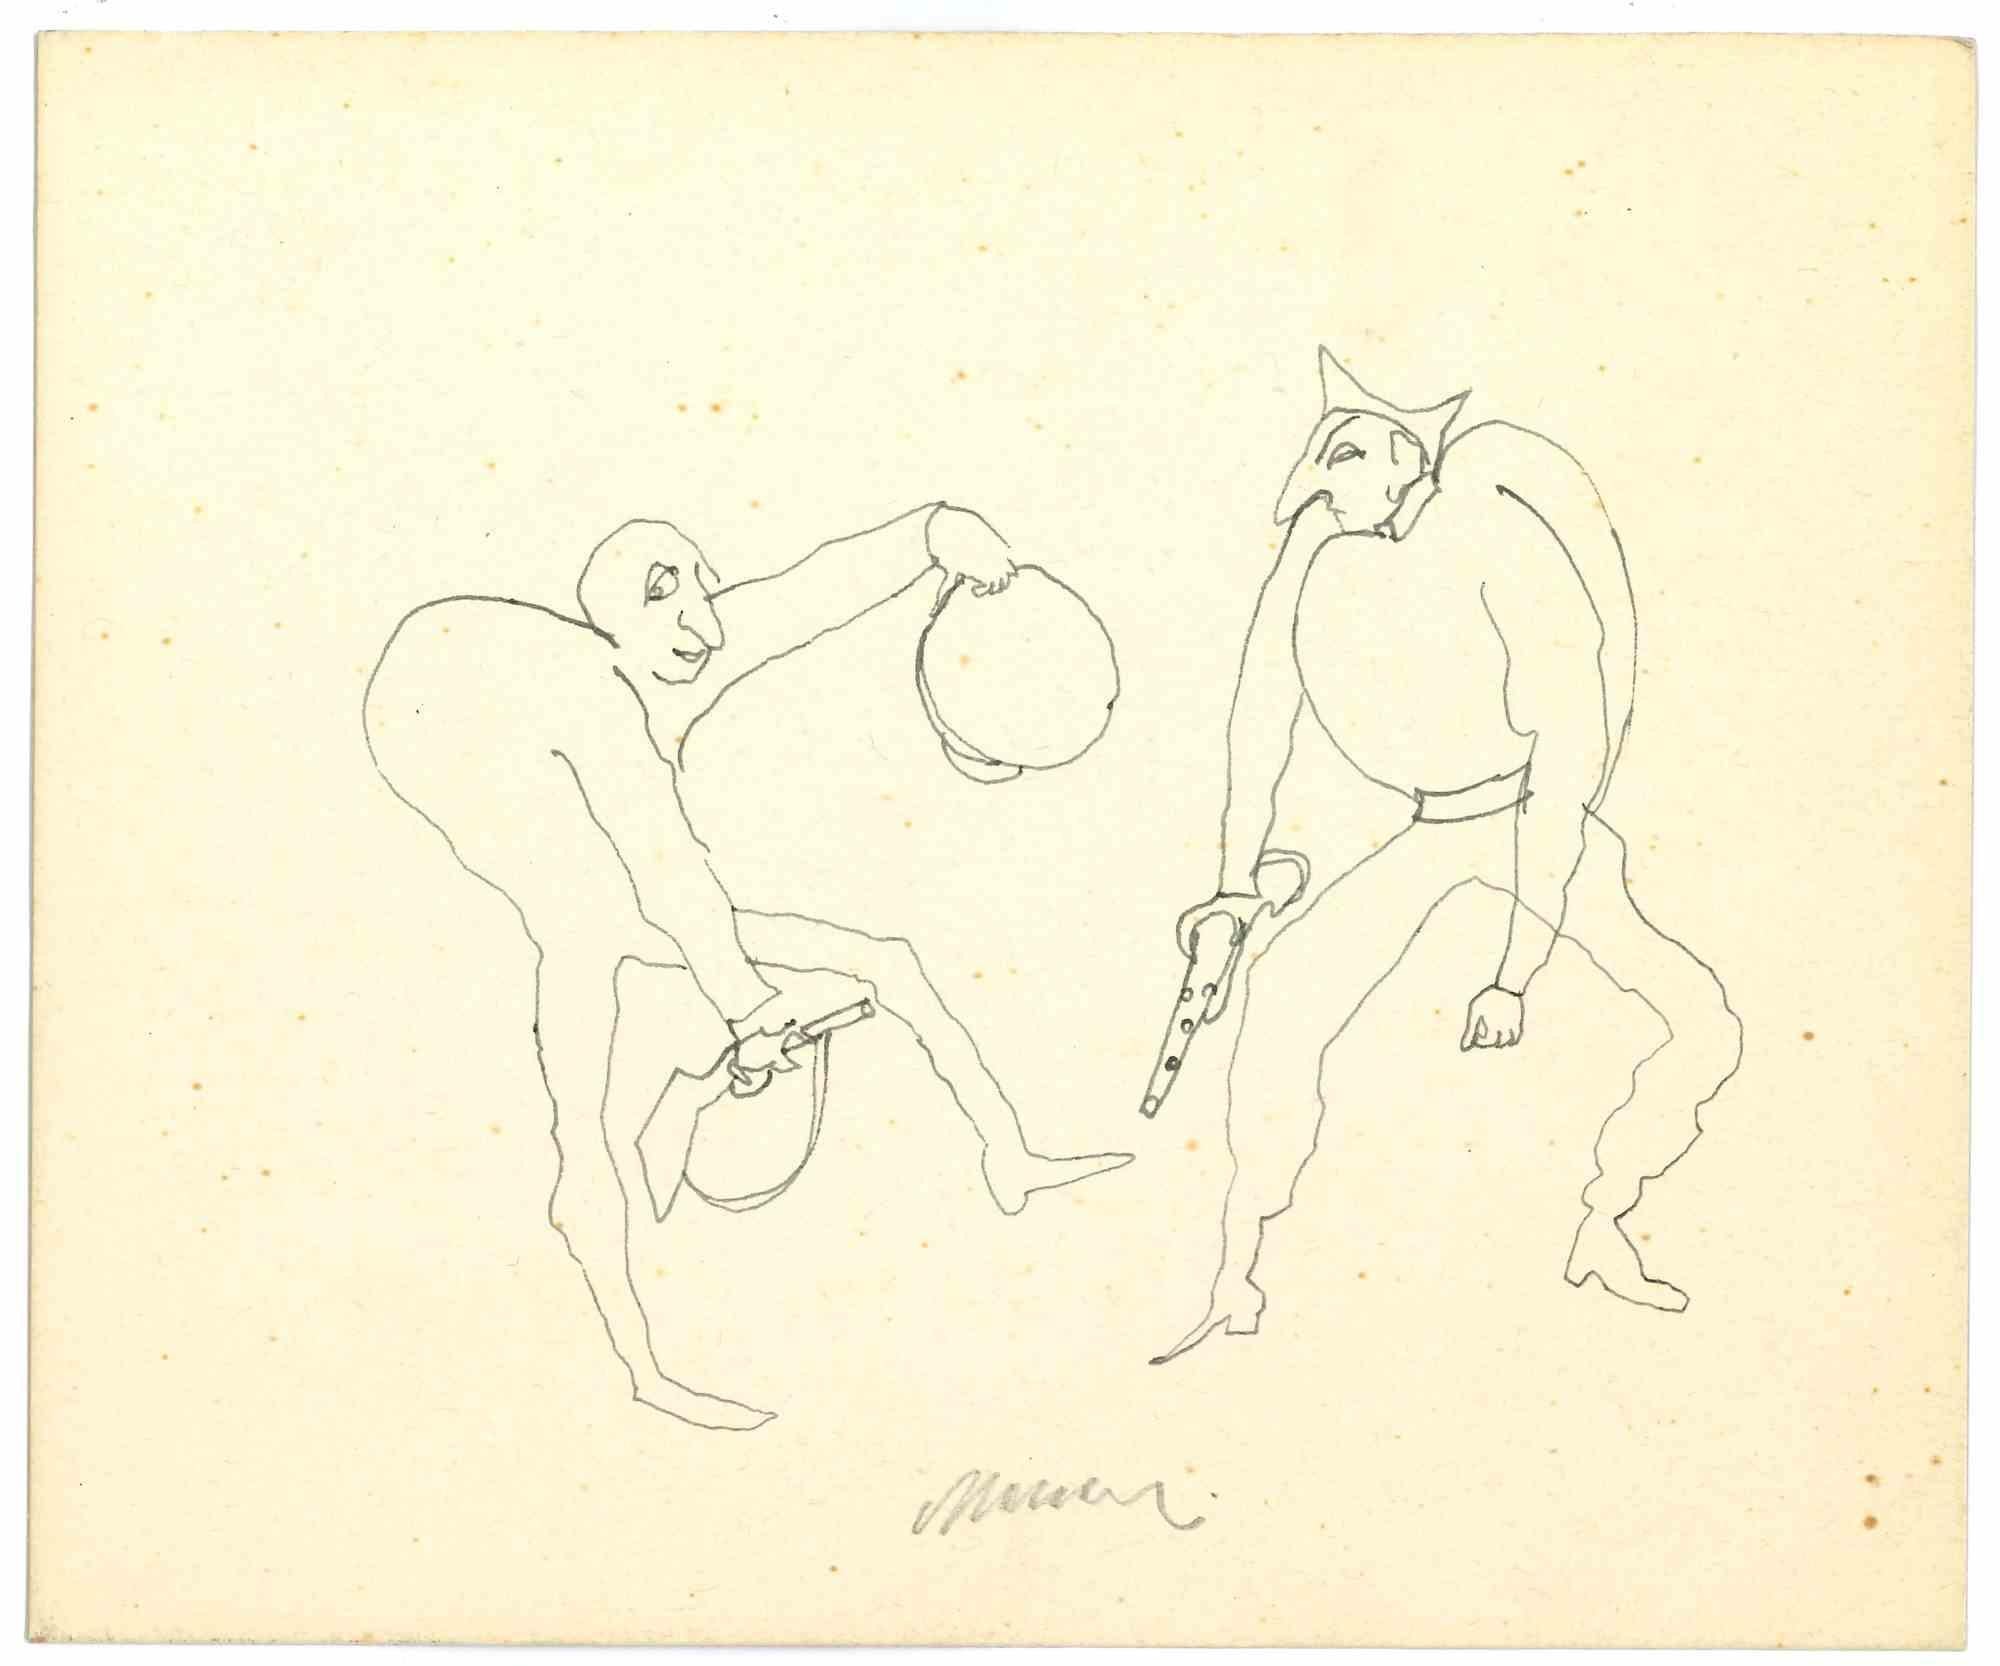 The Men with Guns is a Pen Drawing realized by Mino Maccari  (1924-1989) in the 1960s.

Monogrammed on the lower.

Good condition.

Mino Maccari (Siena, 1924-Rome, June 16, 1989) was an Italian writer, painter, engraver and journalist, winner of the